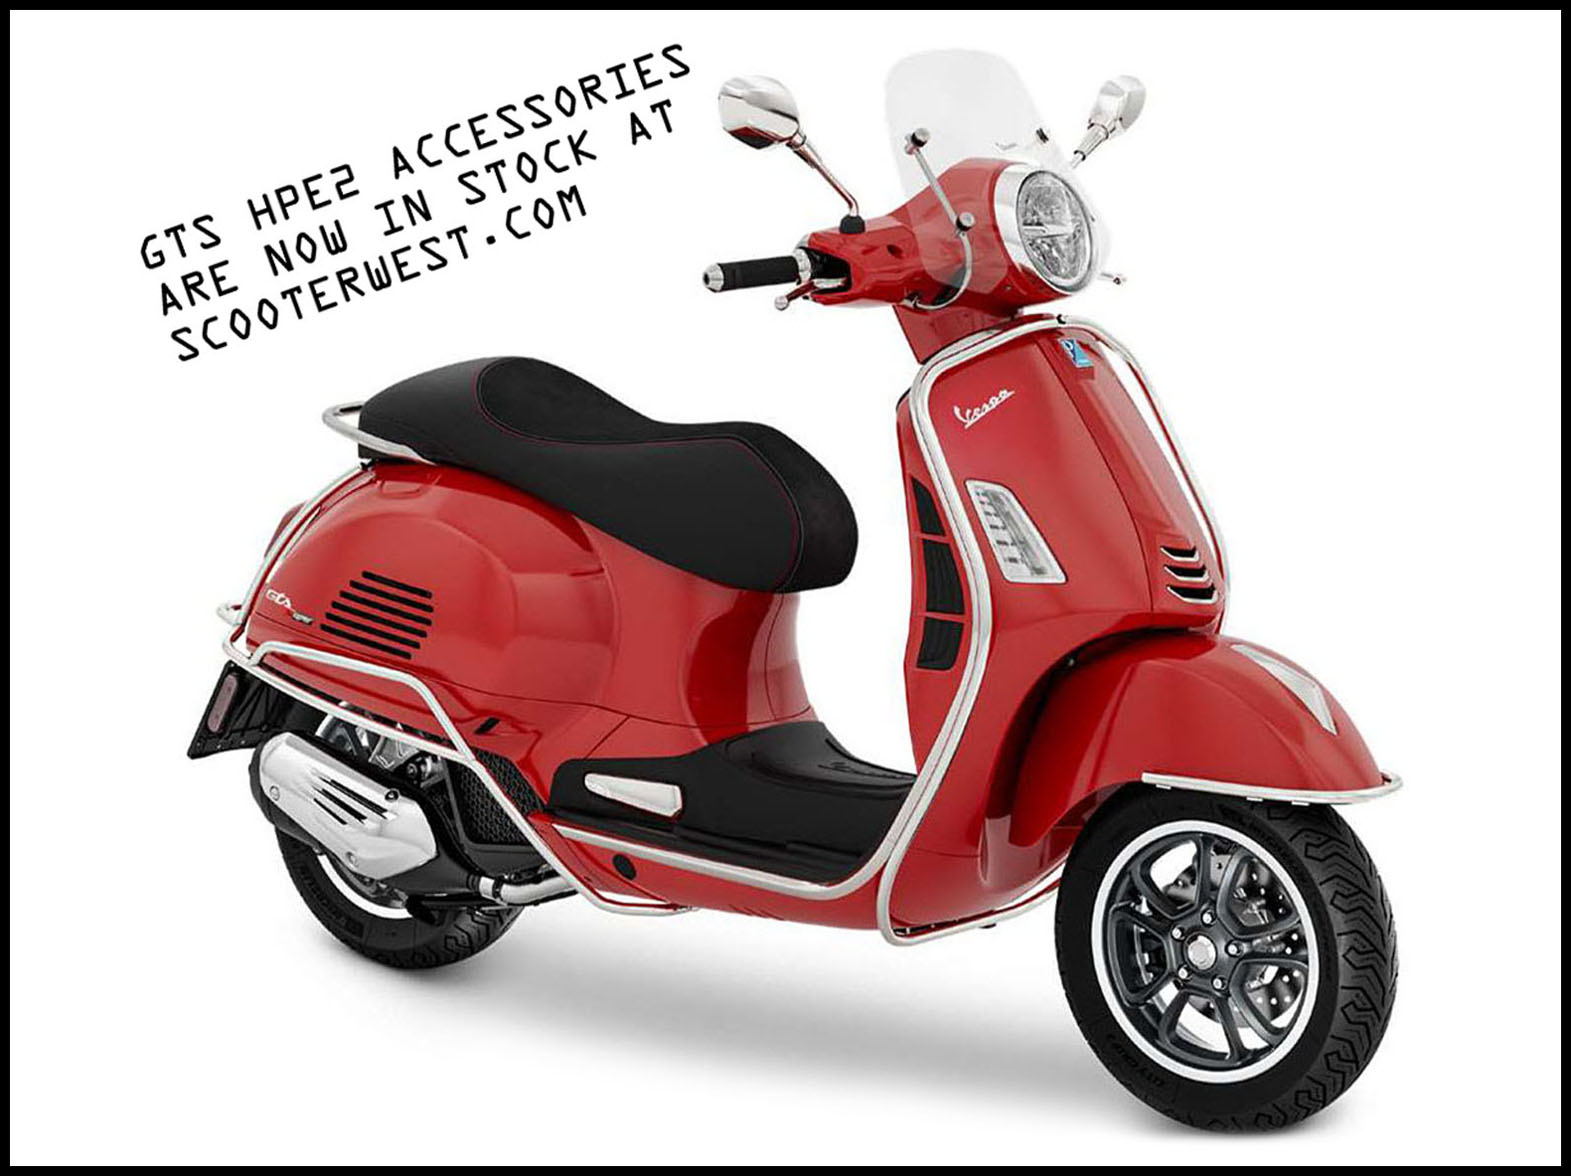 Check out our huge selection of NEW accessories for your 2023 Vespa GTS  HPE2 at Scooterwest.com, San Diego Scooters, Vespa, Genuine